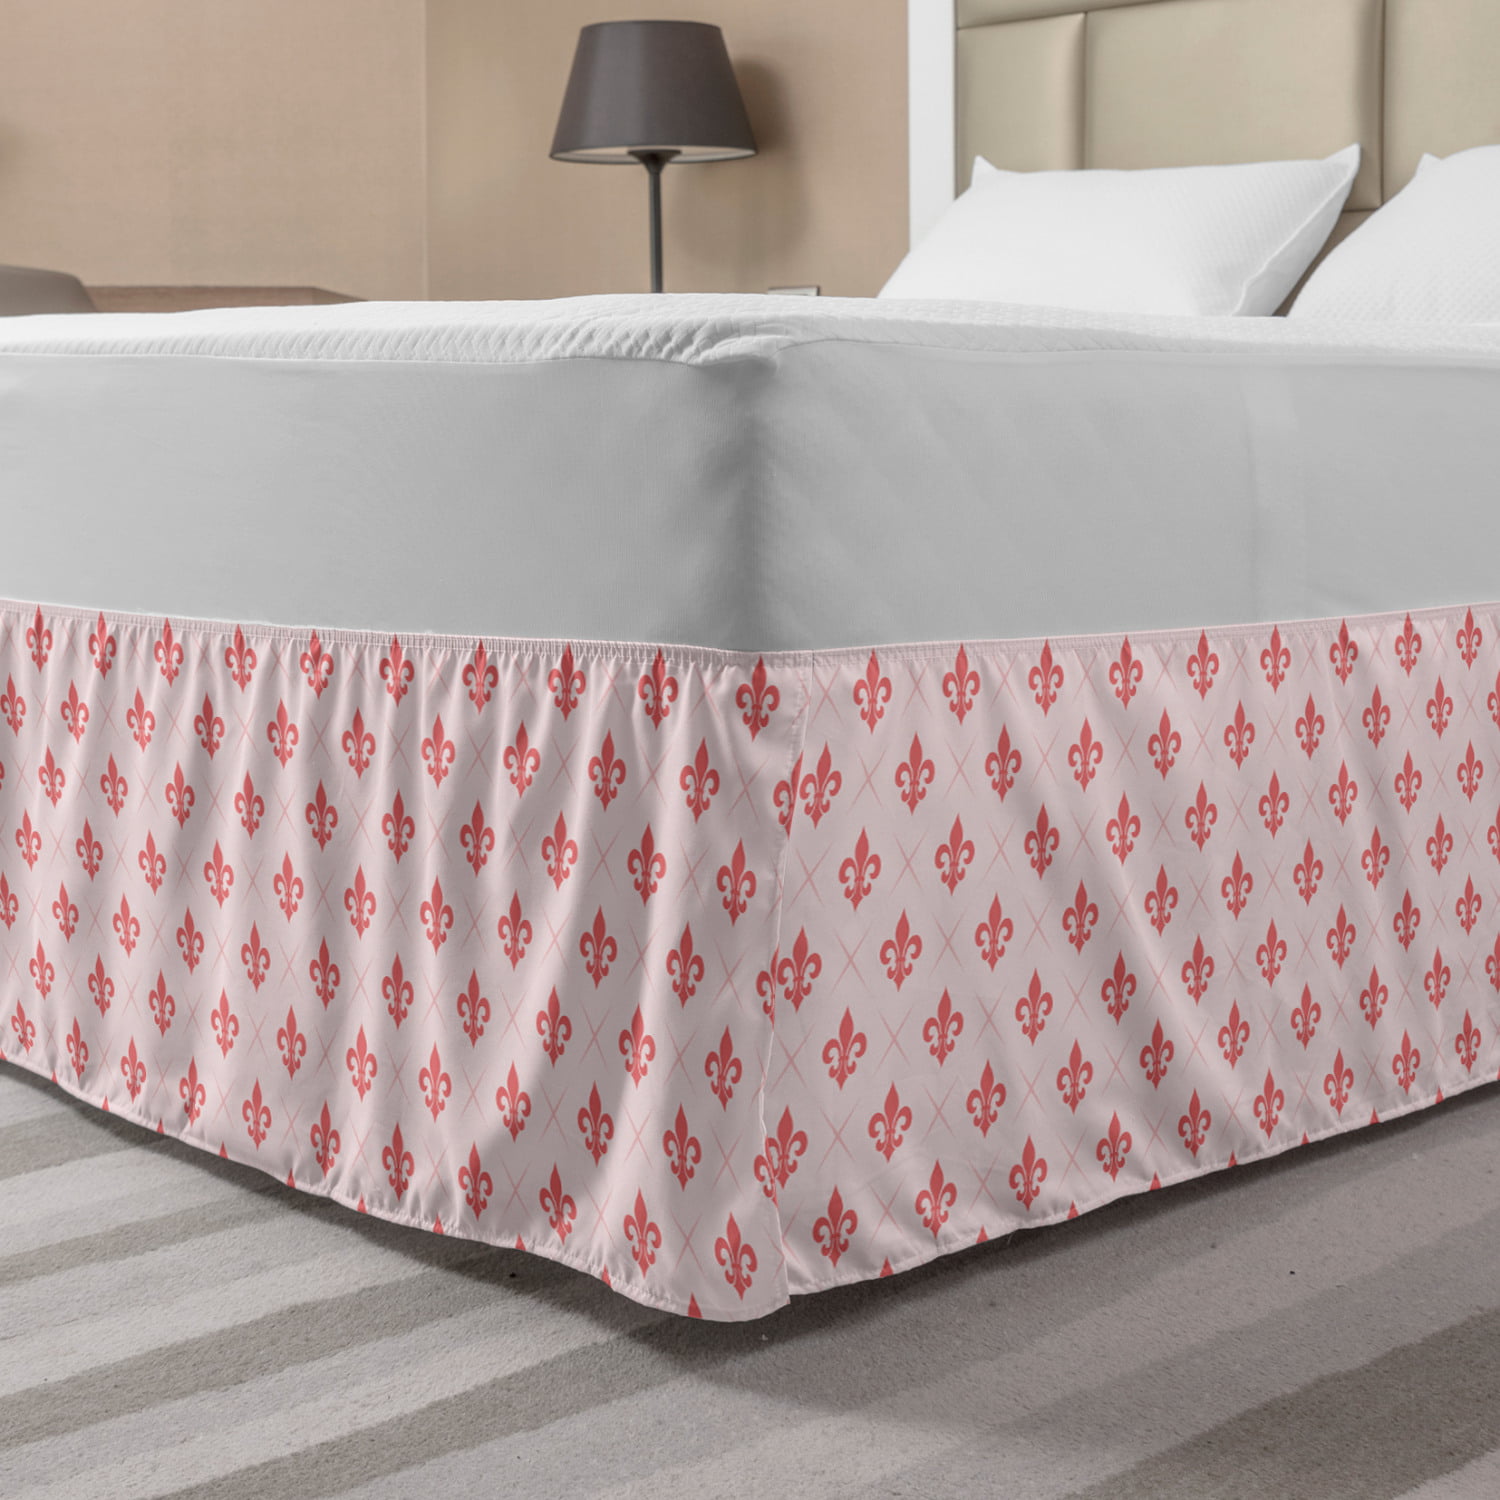 Serena and Lily Bed Skirt Dust Ruffle Twin White Coral Red Pink Pattern Flowers 